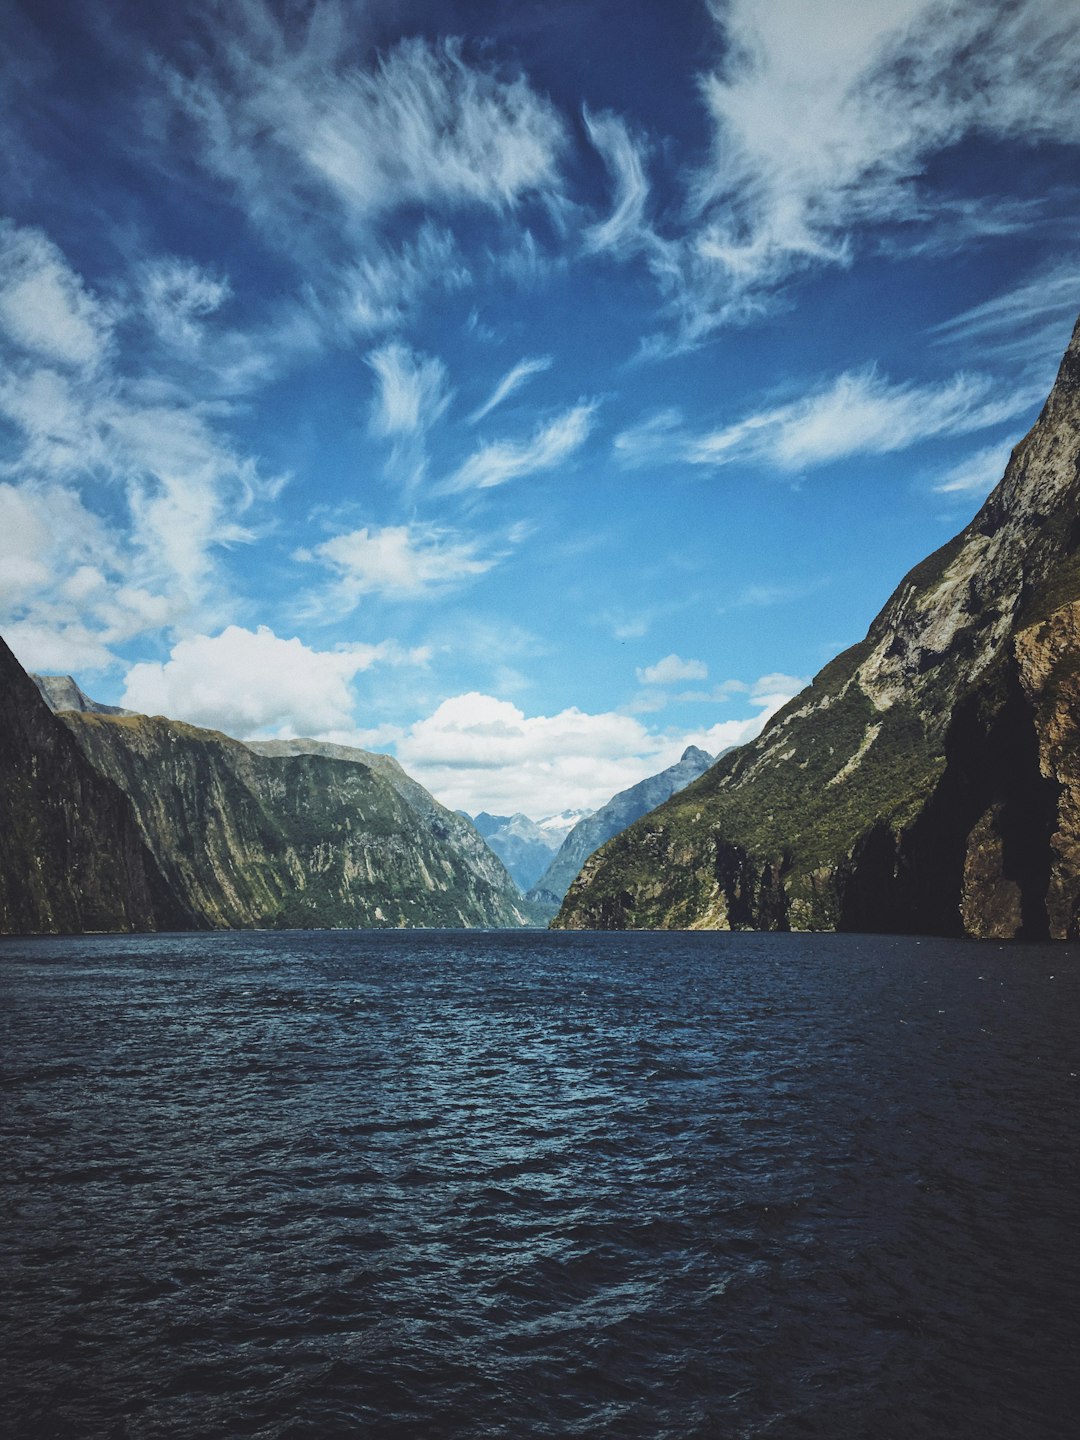 Travel Tips and Stories of Milford Sound in New Zealand